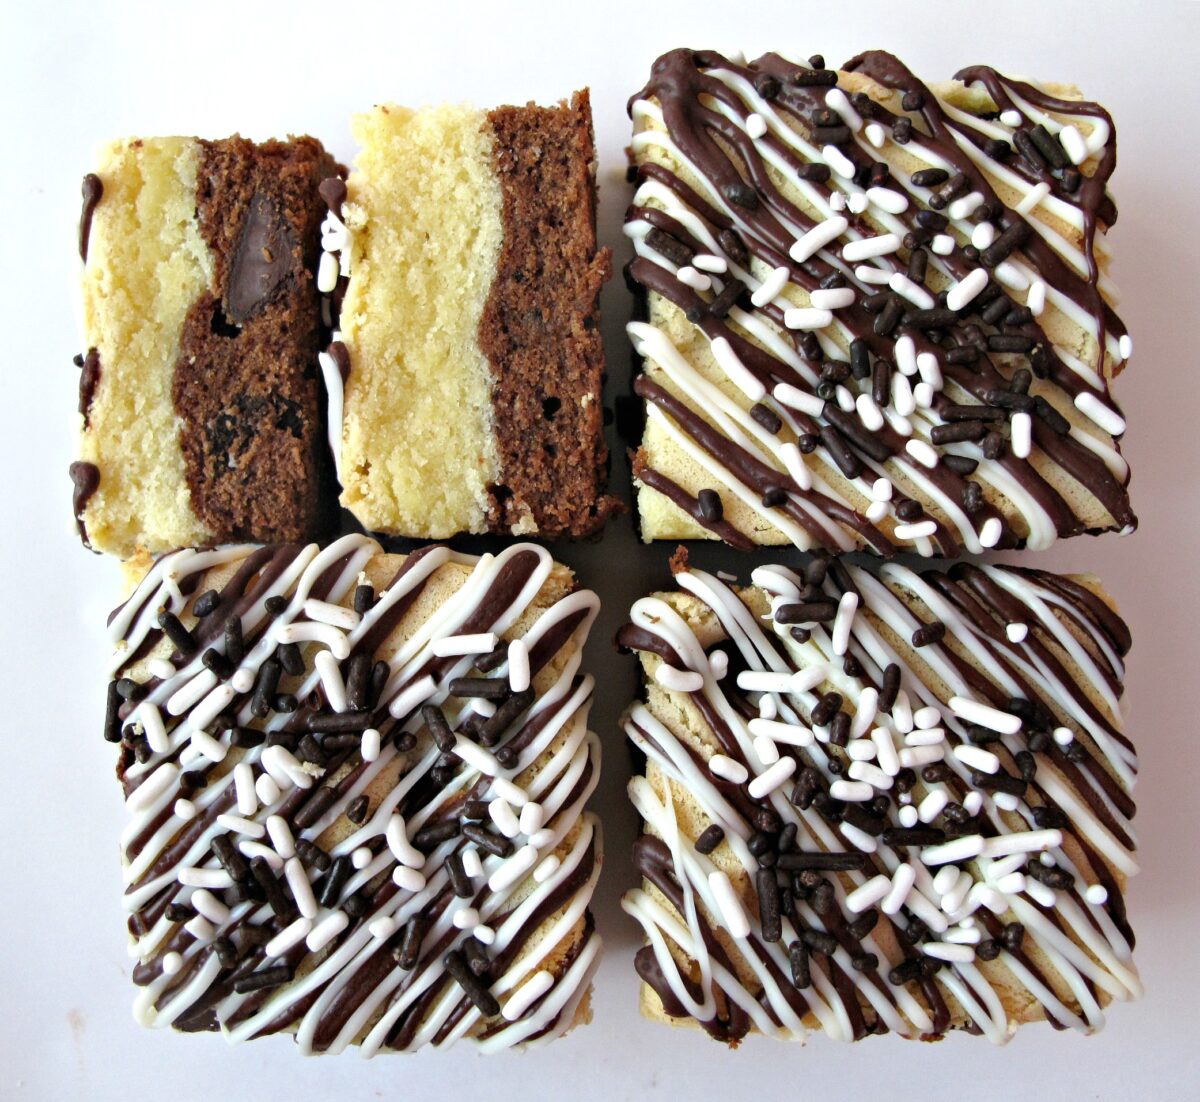 Four squares of Black and White bars decorated with melted chocolate zigzags and sprinkles.